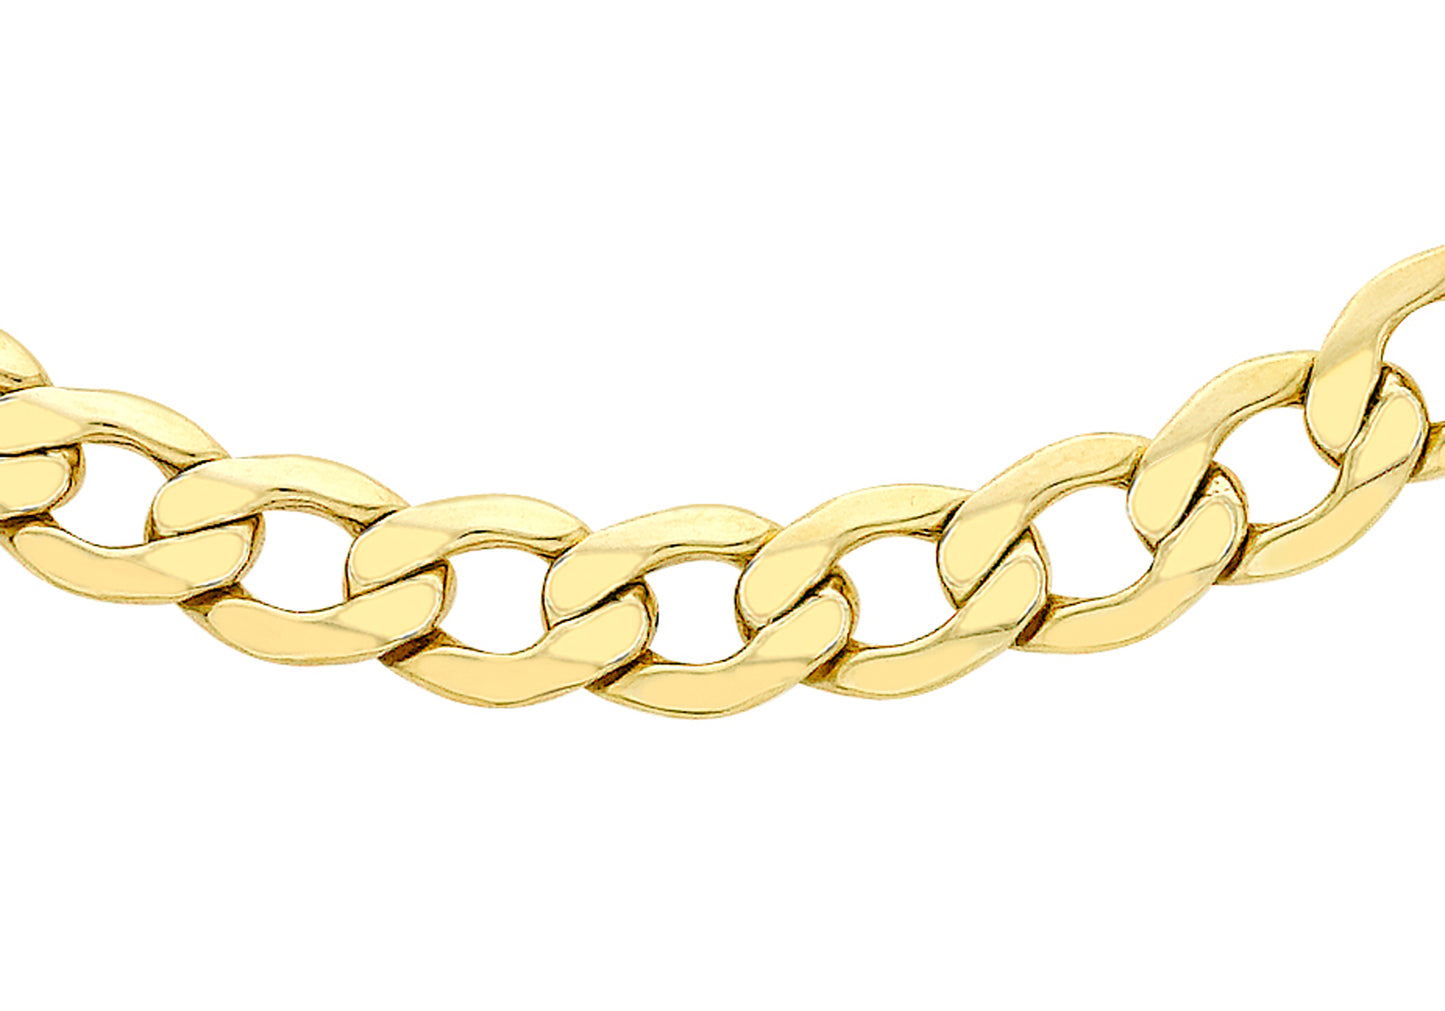 9K Yellow Gold 6.1mm Hollow Curb Chain 18"